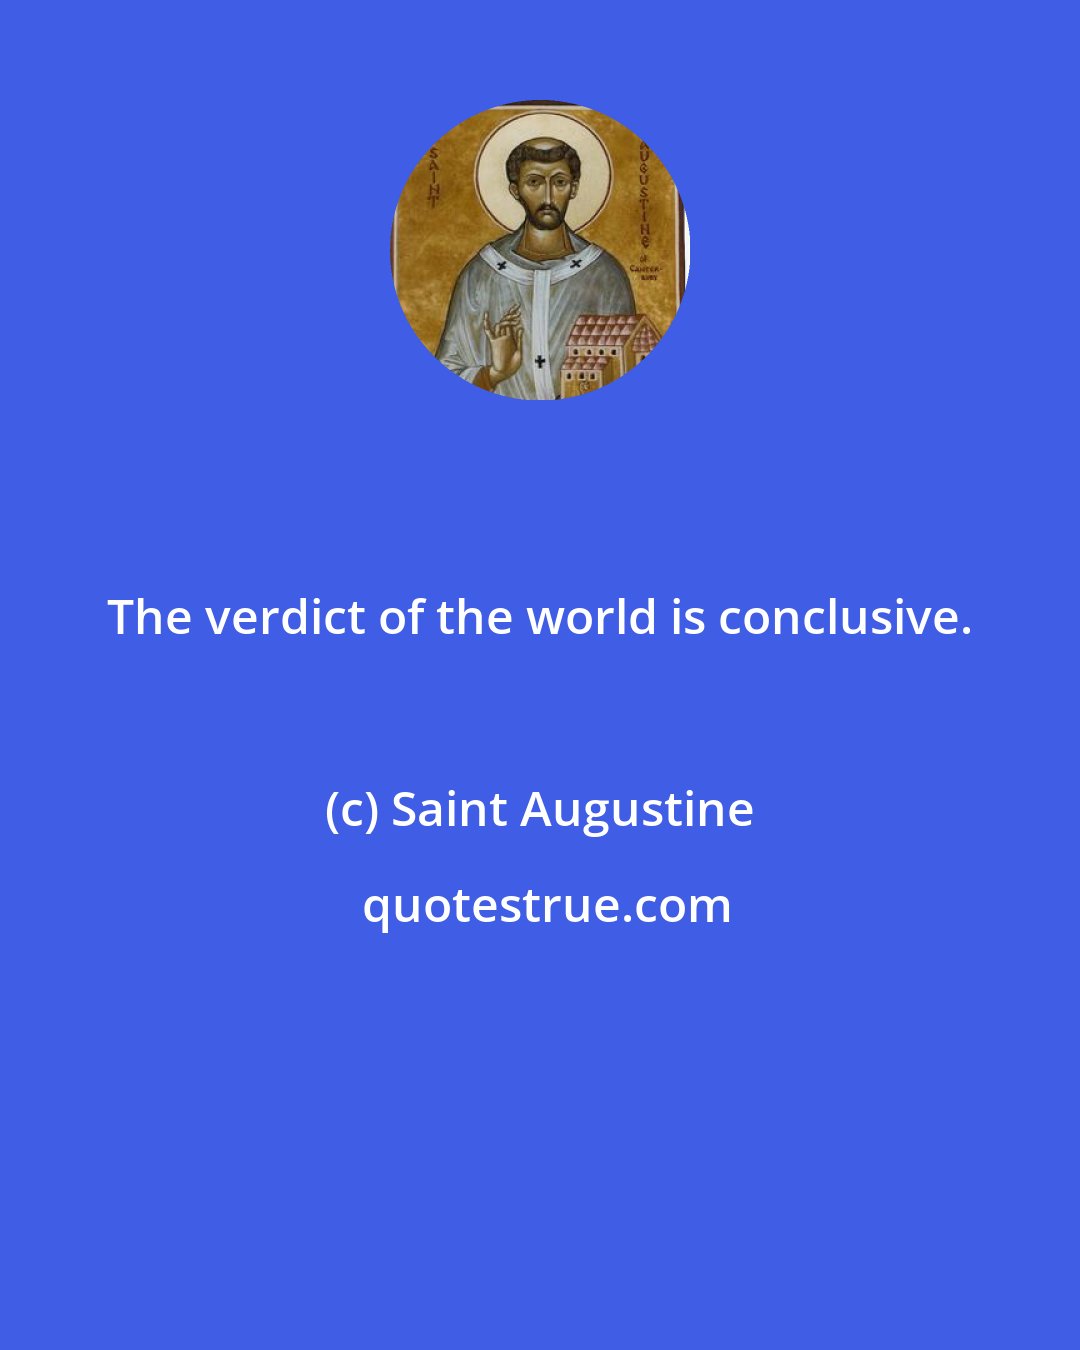 Saint Augustine: The verdict of the world is conclusive.